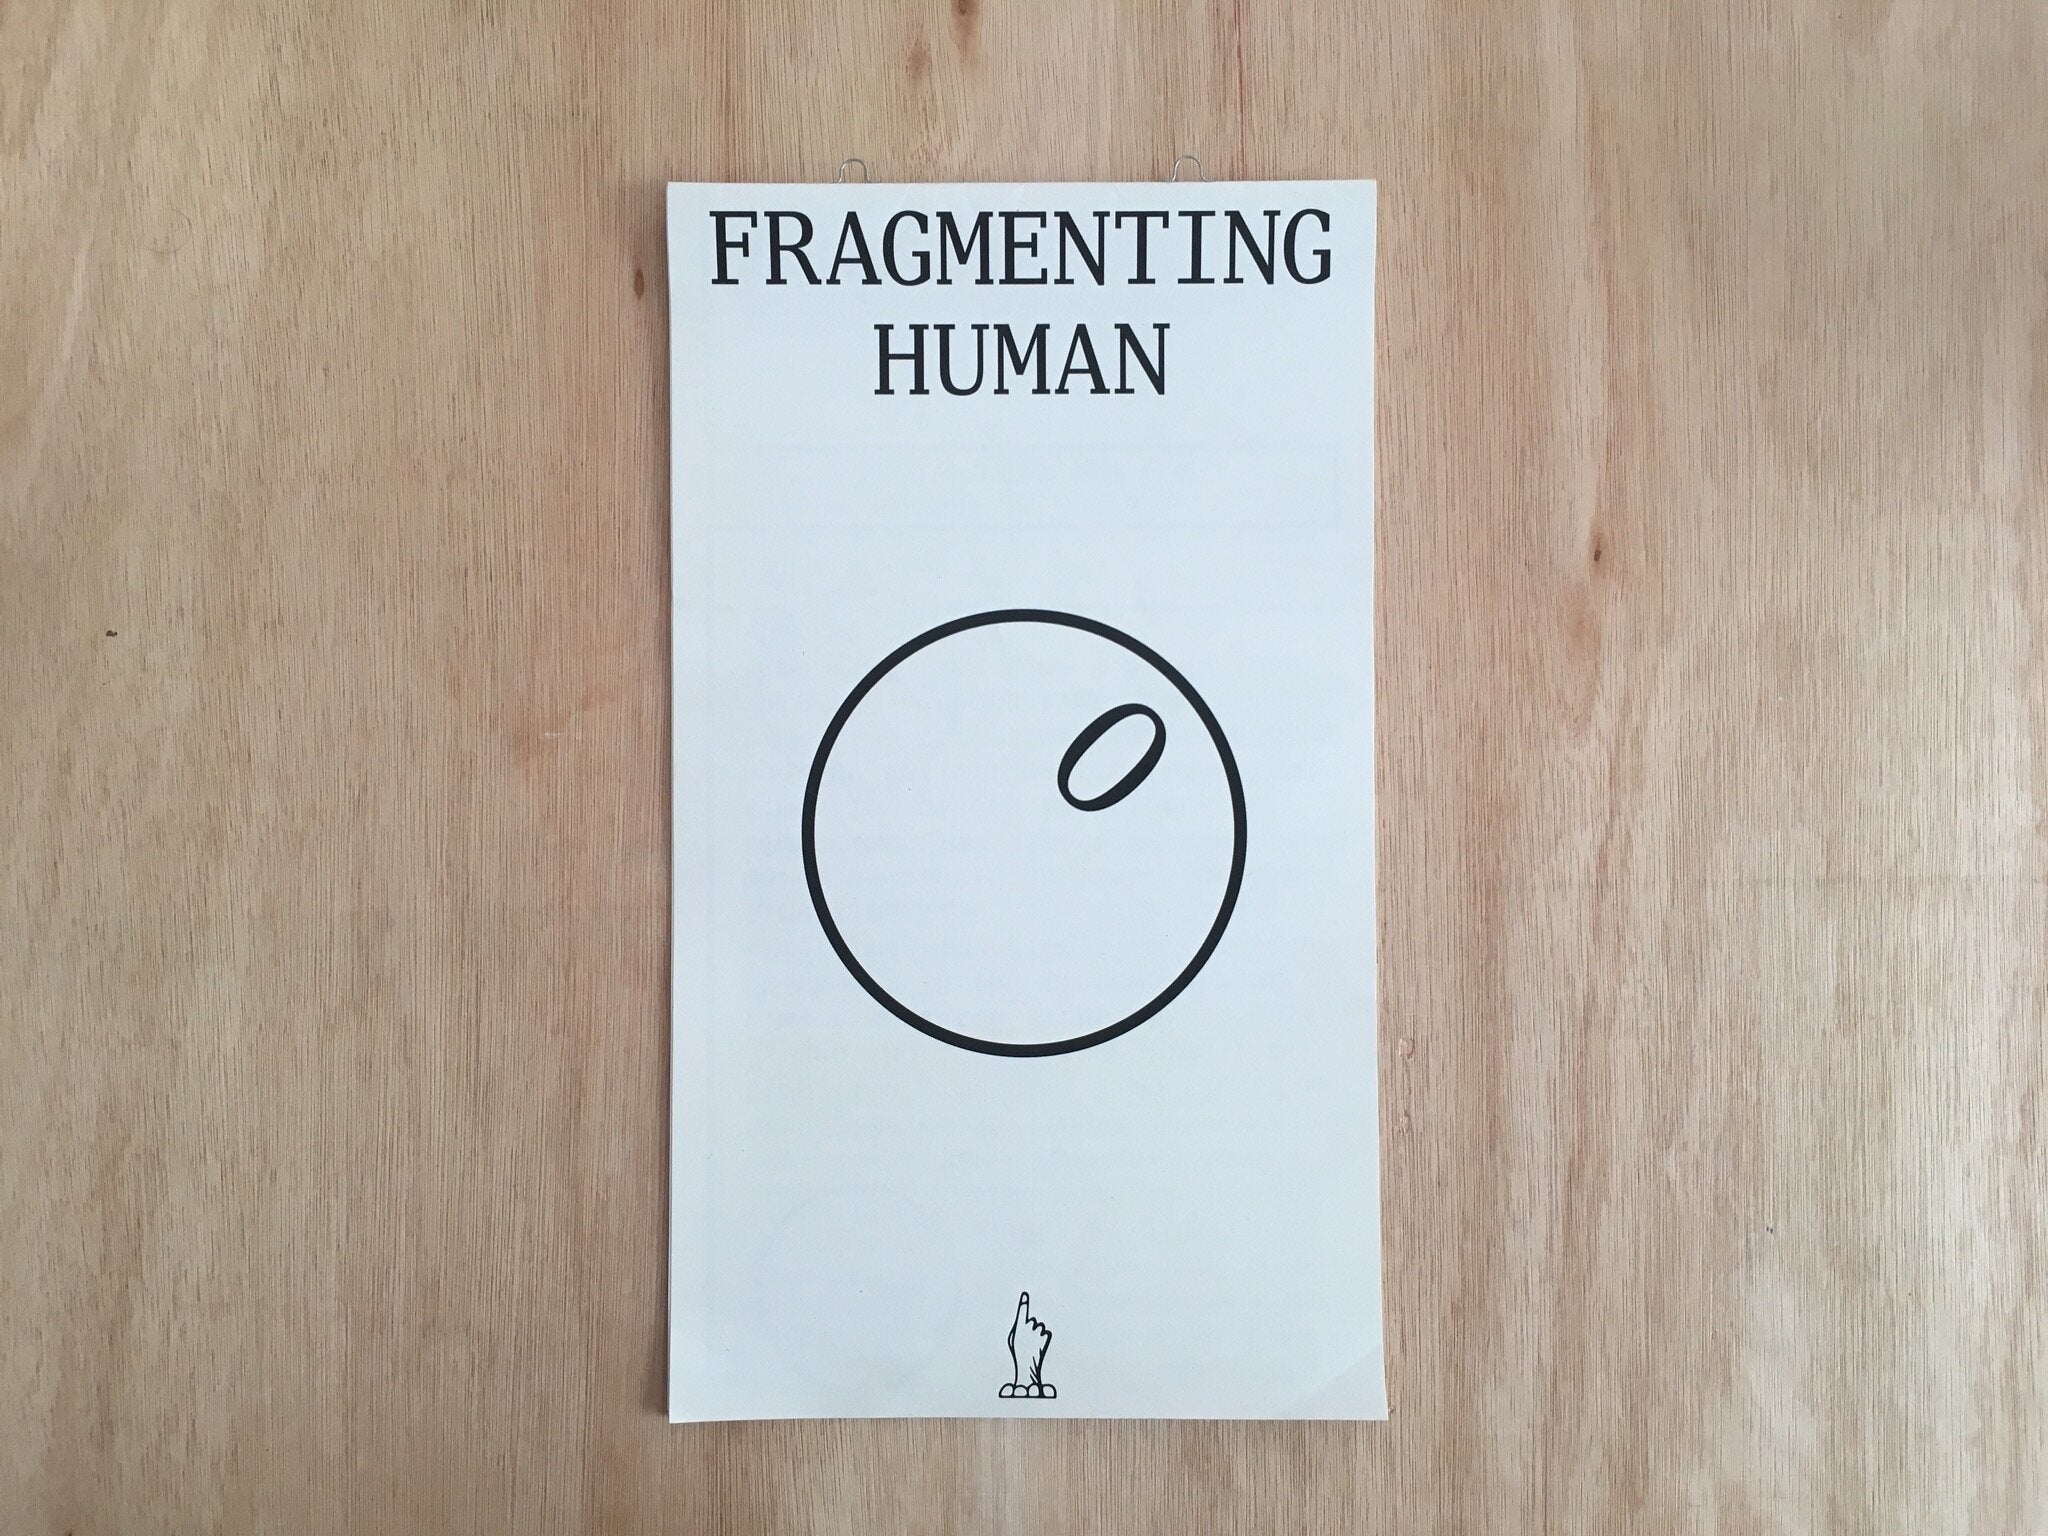 FRAGMENTING HUMAN by Debbie Young